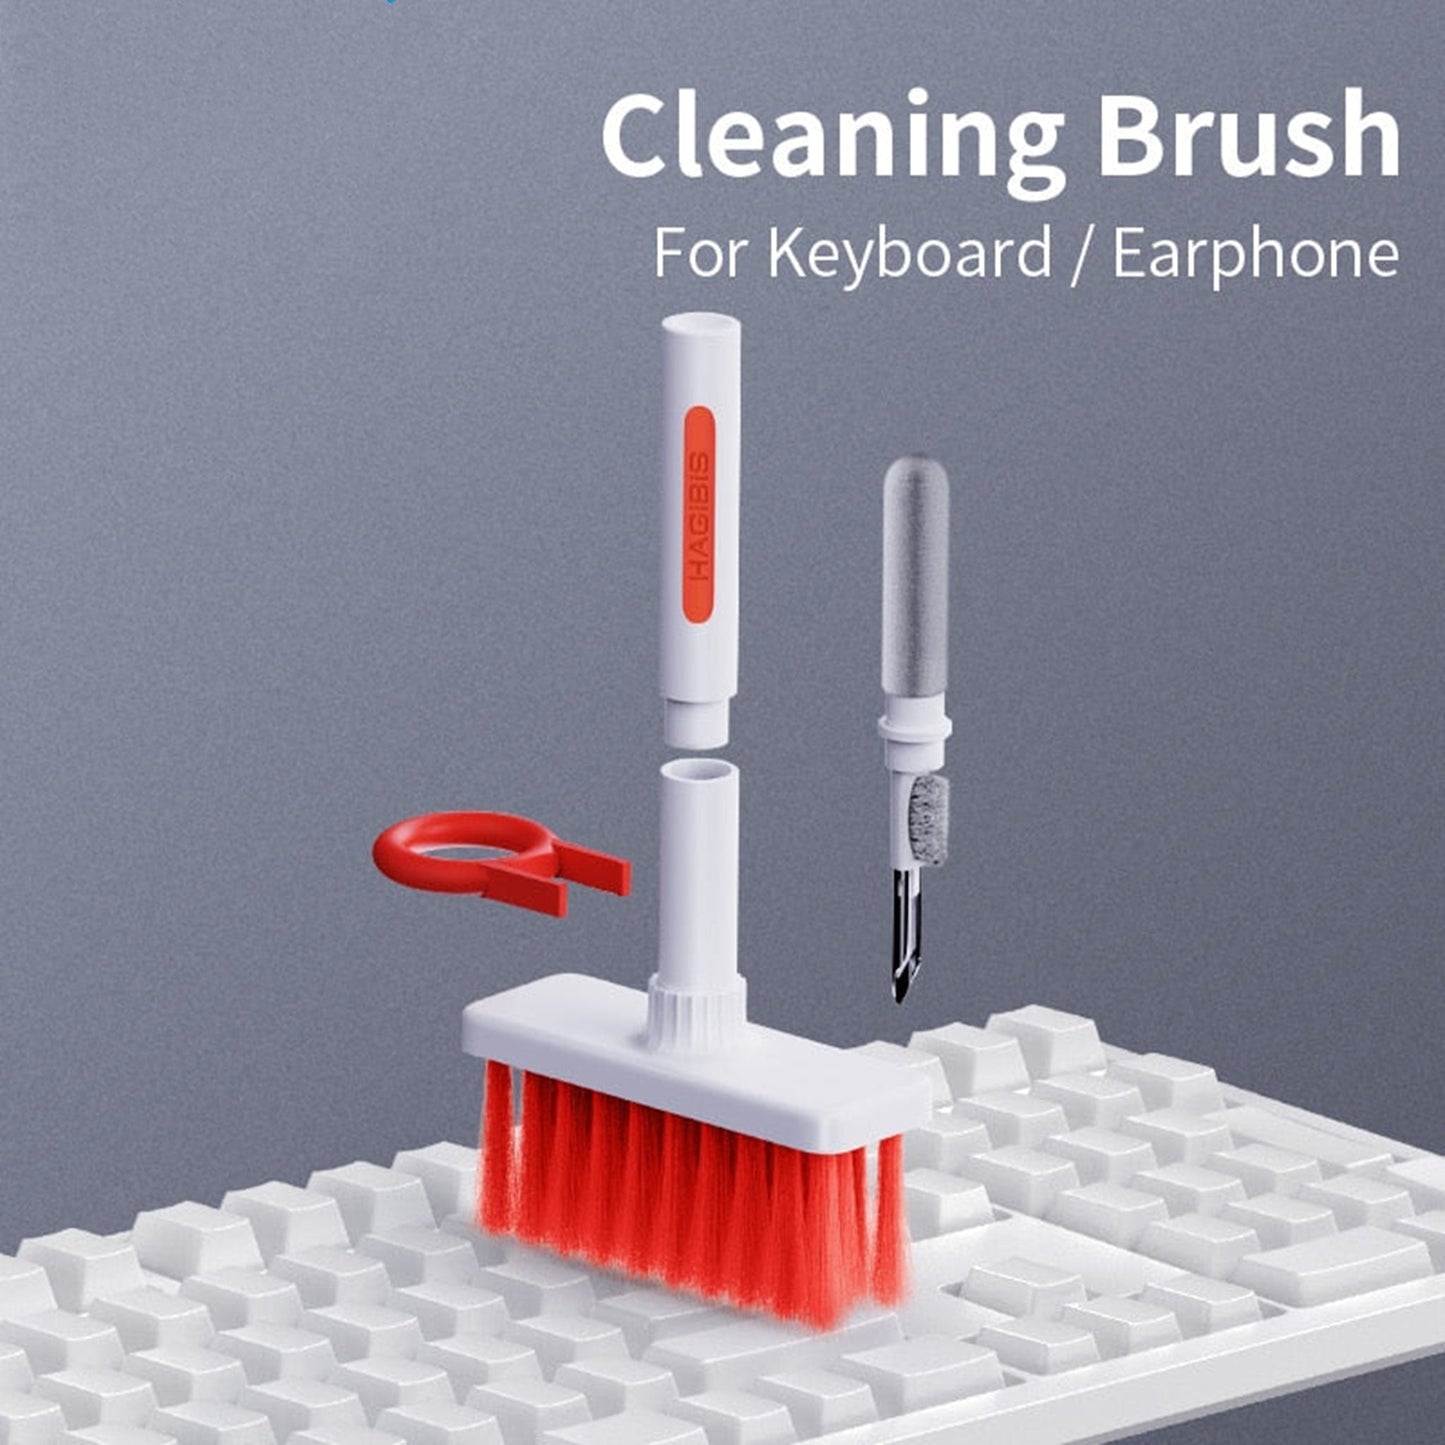 Gadget Cleaning Kit - HOW DO I BUY THIS Grey